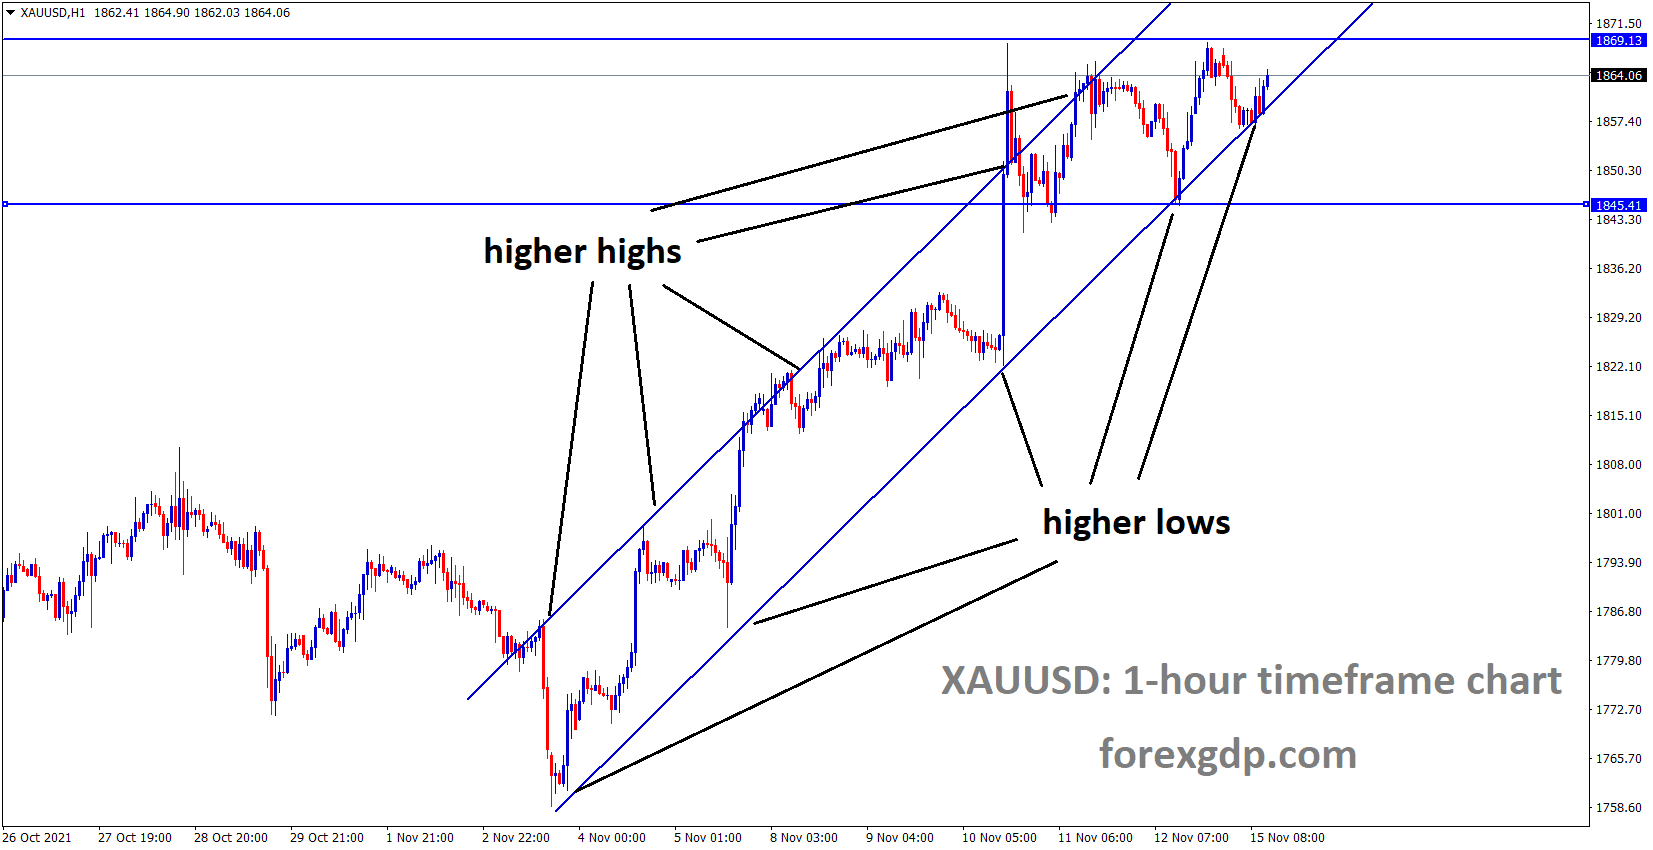 XAUUSD Gold price is moving in an Ascending channel and consolidation happened in the Higher high area